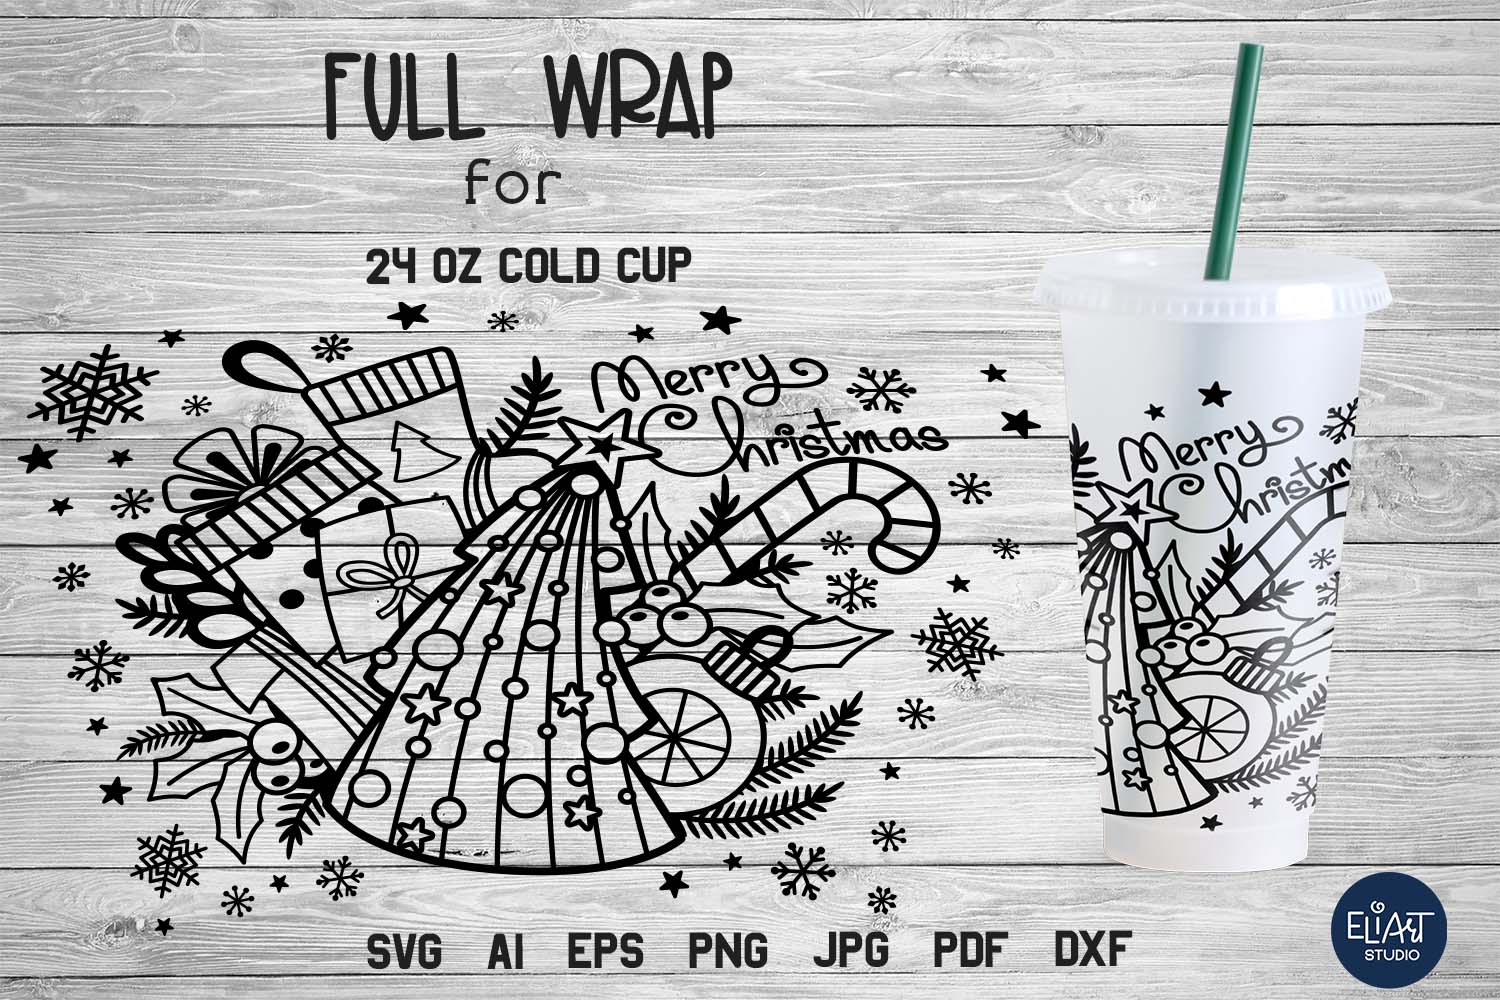 24 fl oz cold cup wrap SVG Fall cold cup wrap SVG - Craft House SVG